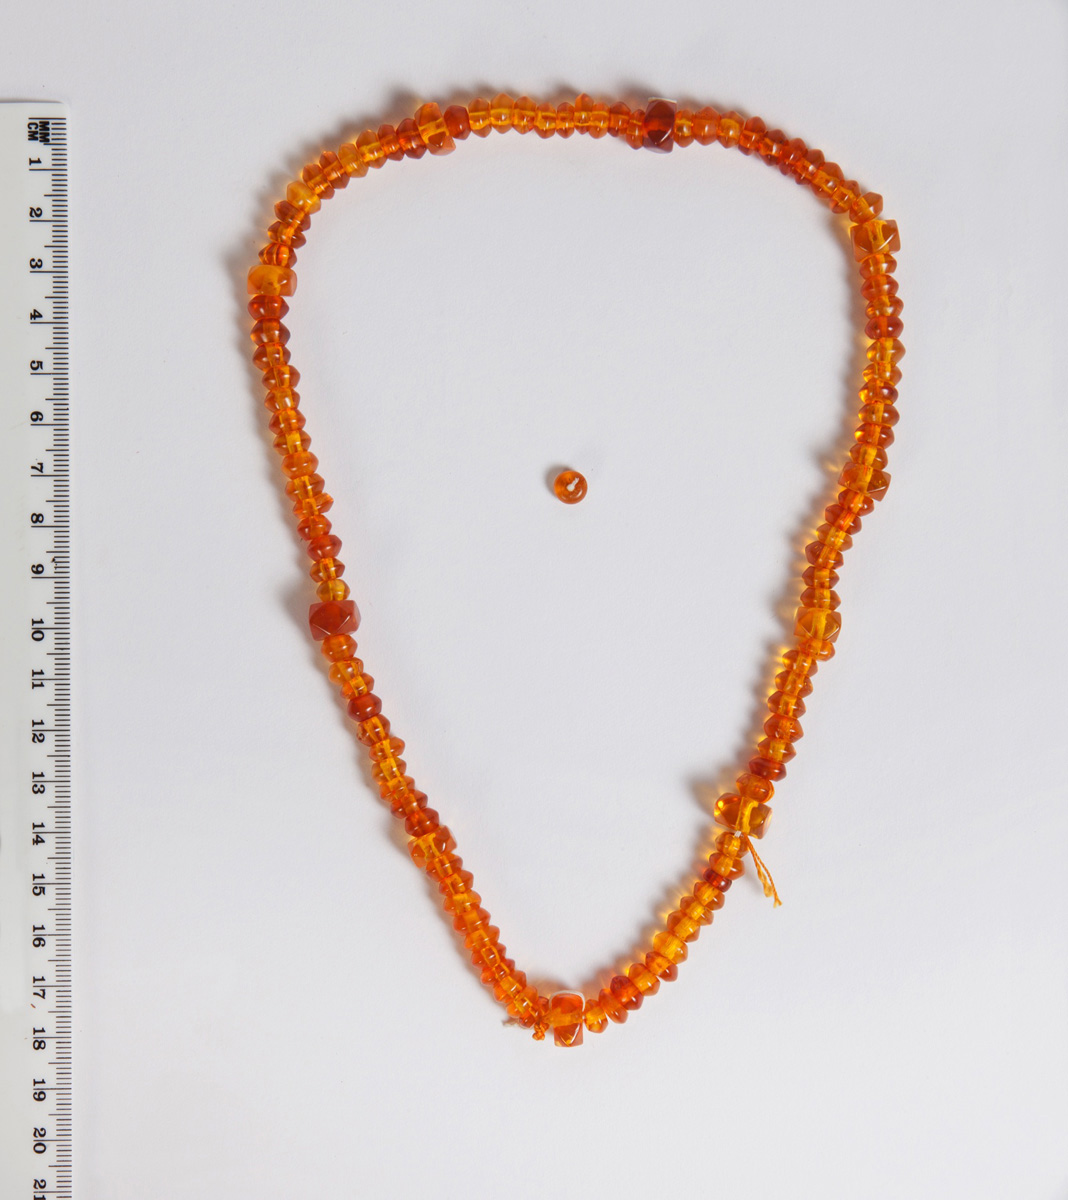 Paternoster-Beads-Necklace-Amber-Grand-Parade-01